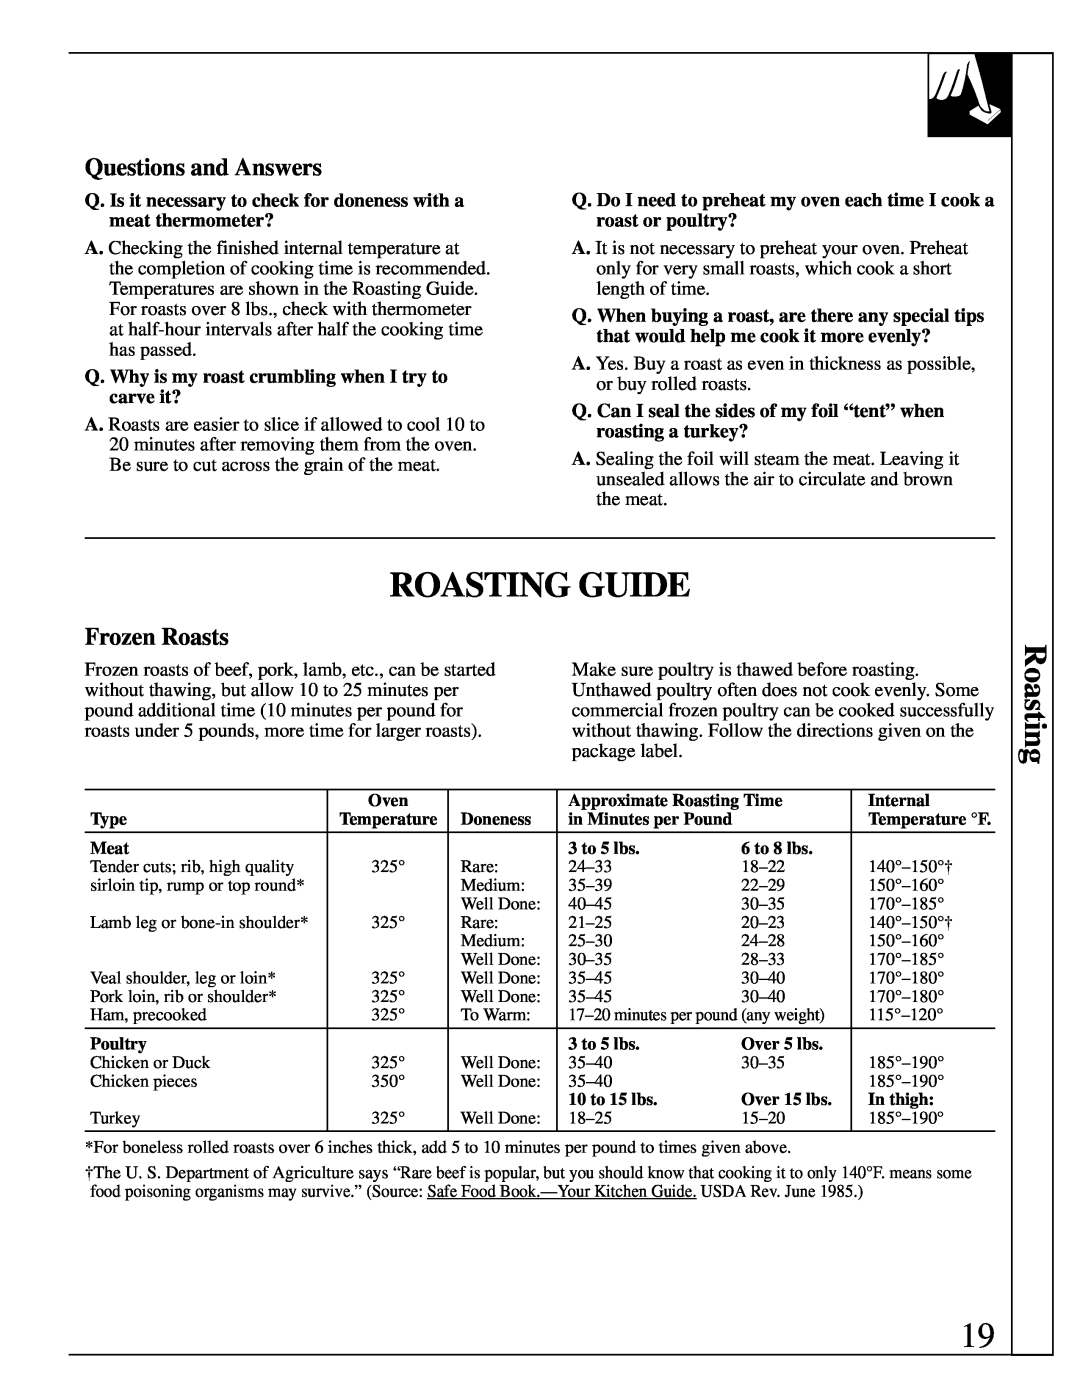 GE JDP36, JDP37 manual Roasting Guide, Questions and Answers, Frozen Roasts 